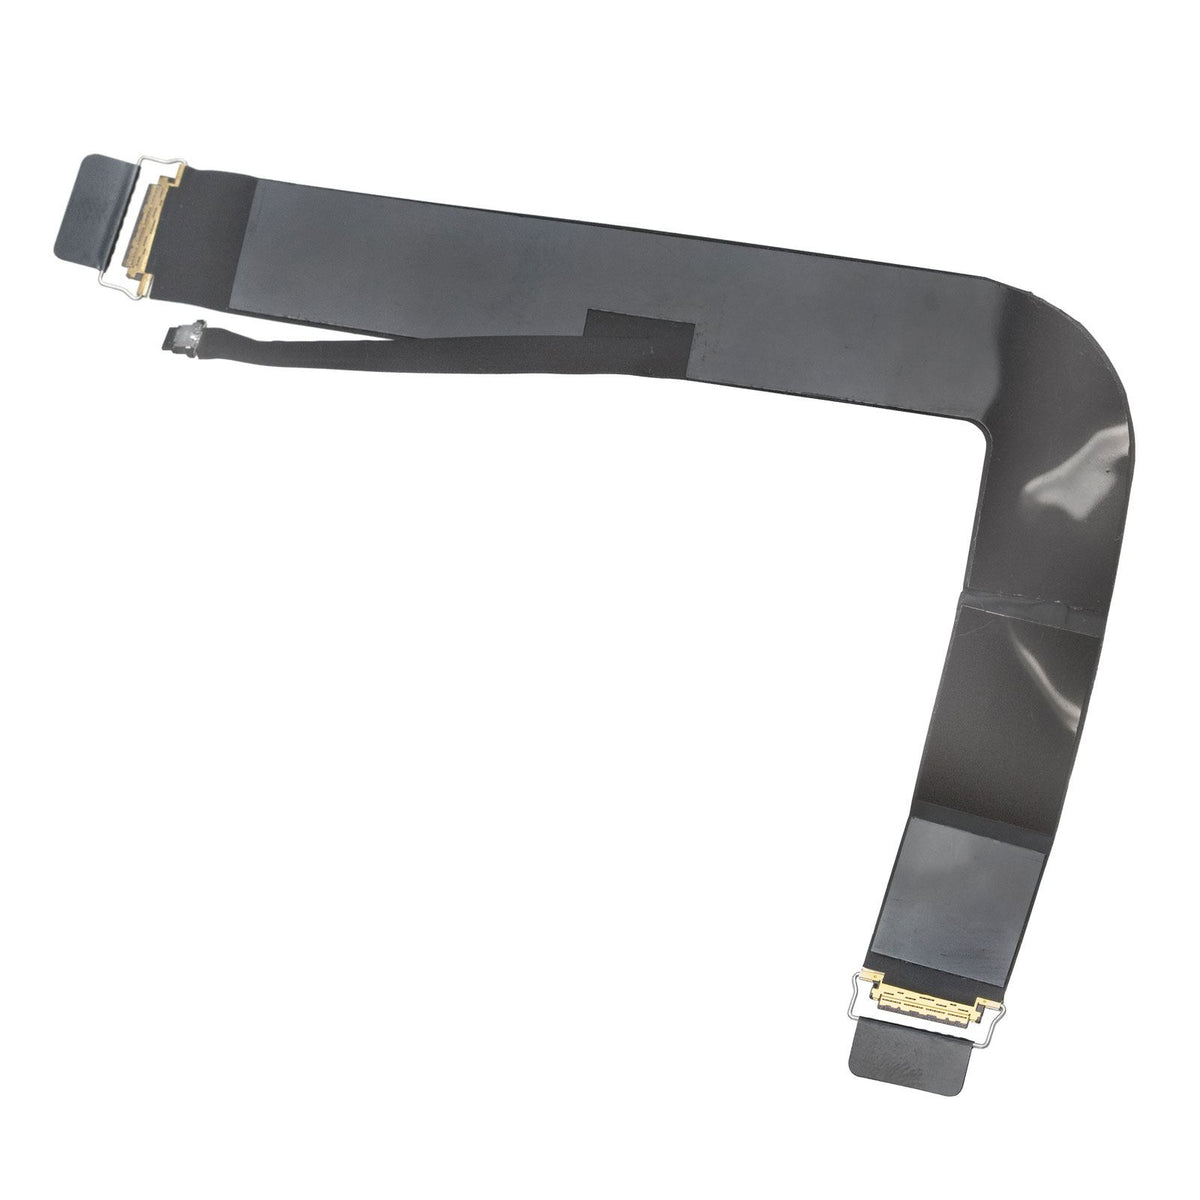 ISIGHT CAMERA & MICROPHONE CABLE FOR IMAC 21.5" A1418 (LATE 2012, MID 2014)